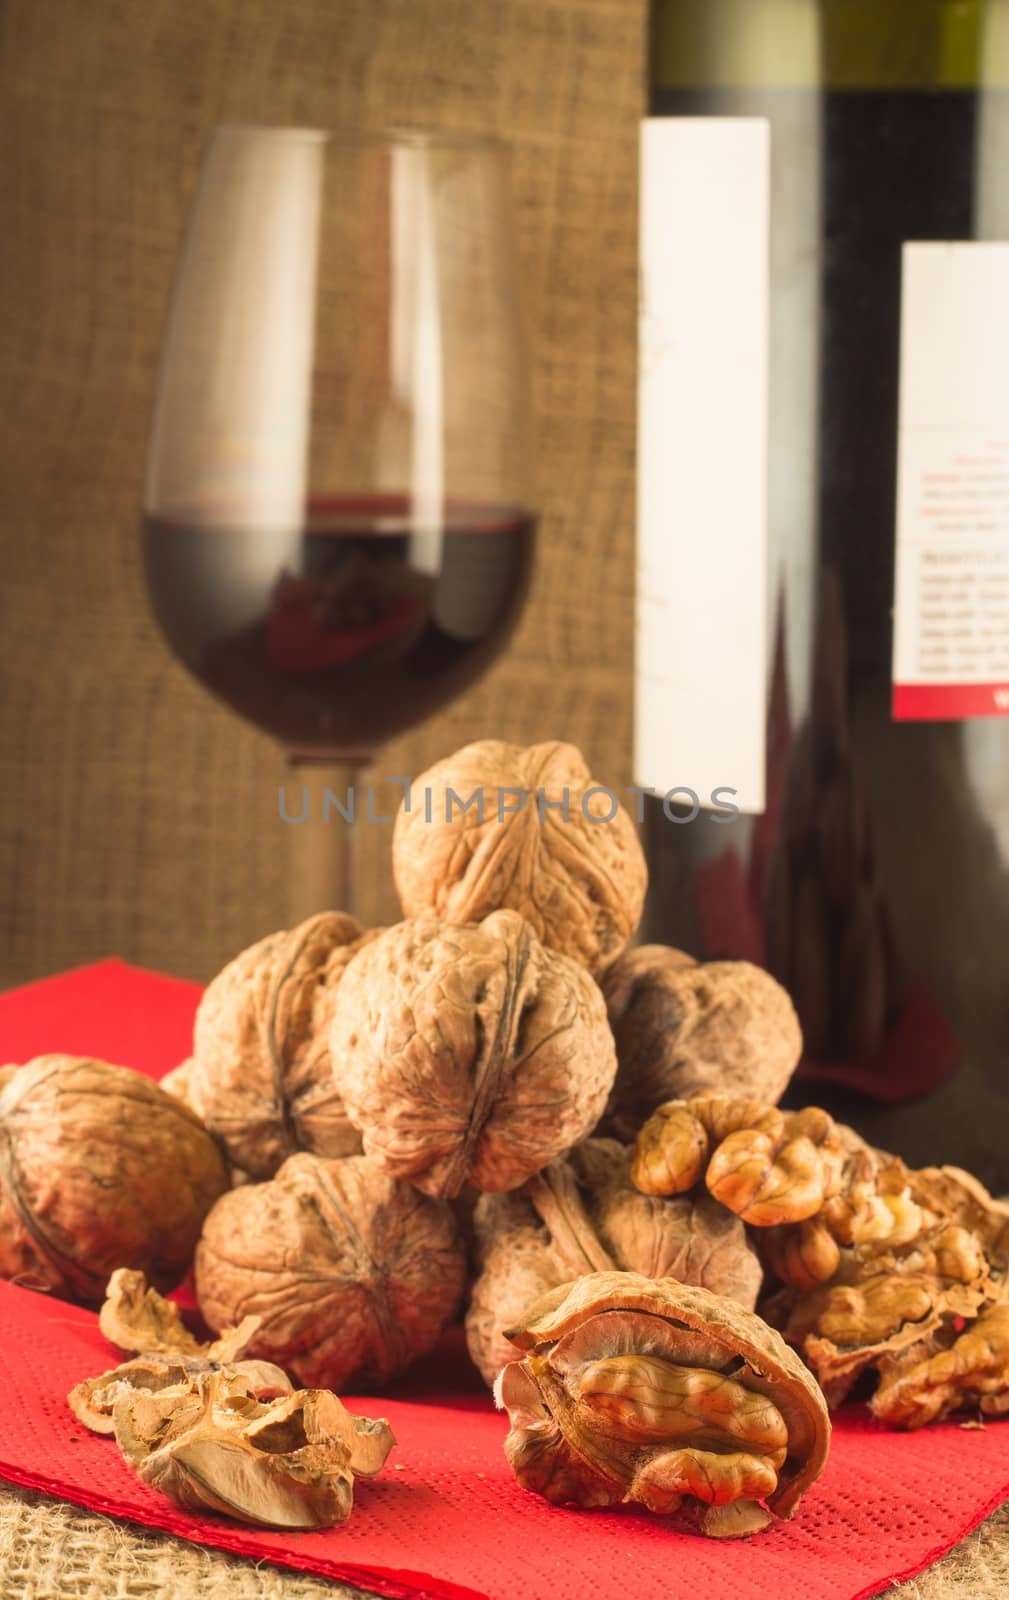 walnuts and red wine by goghy73